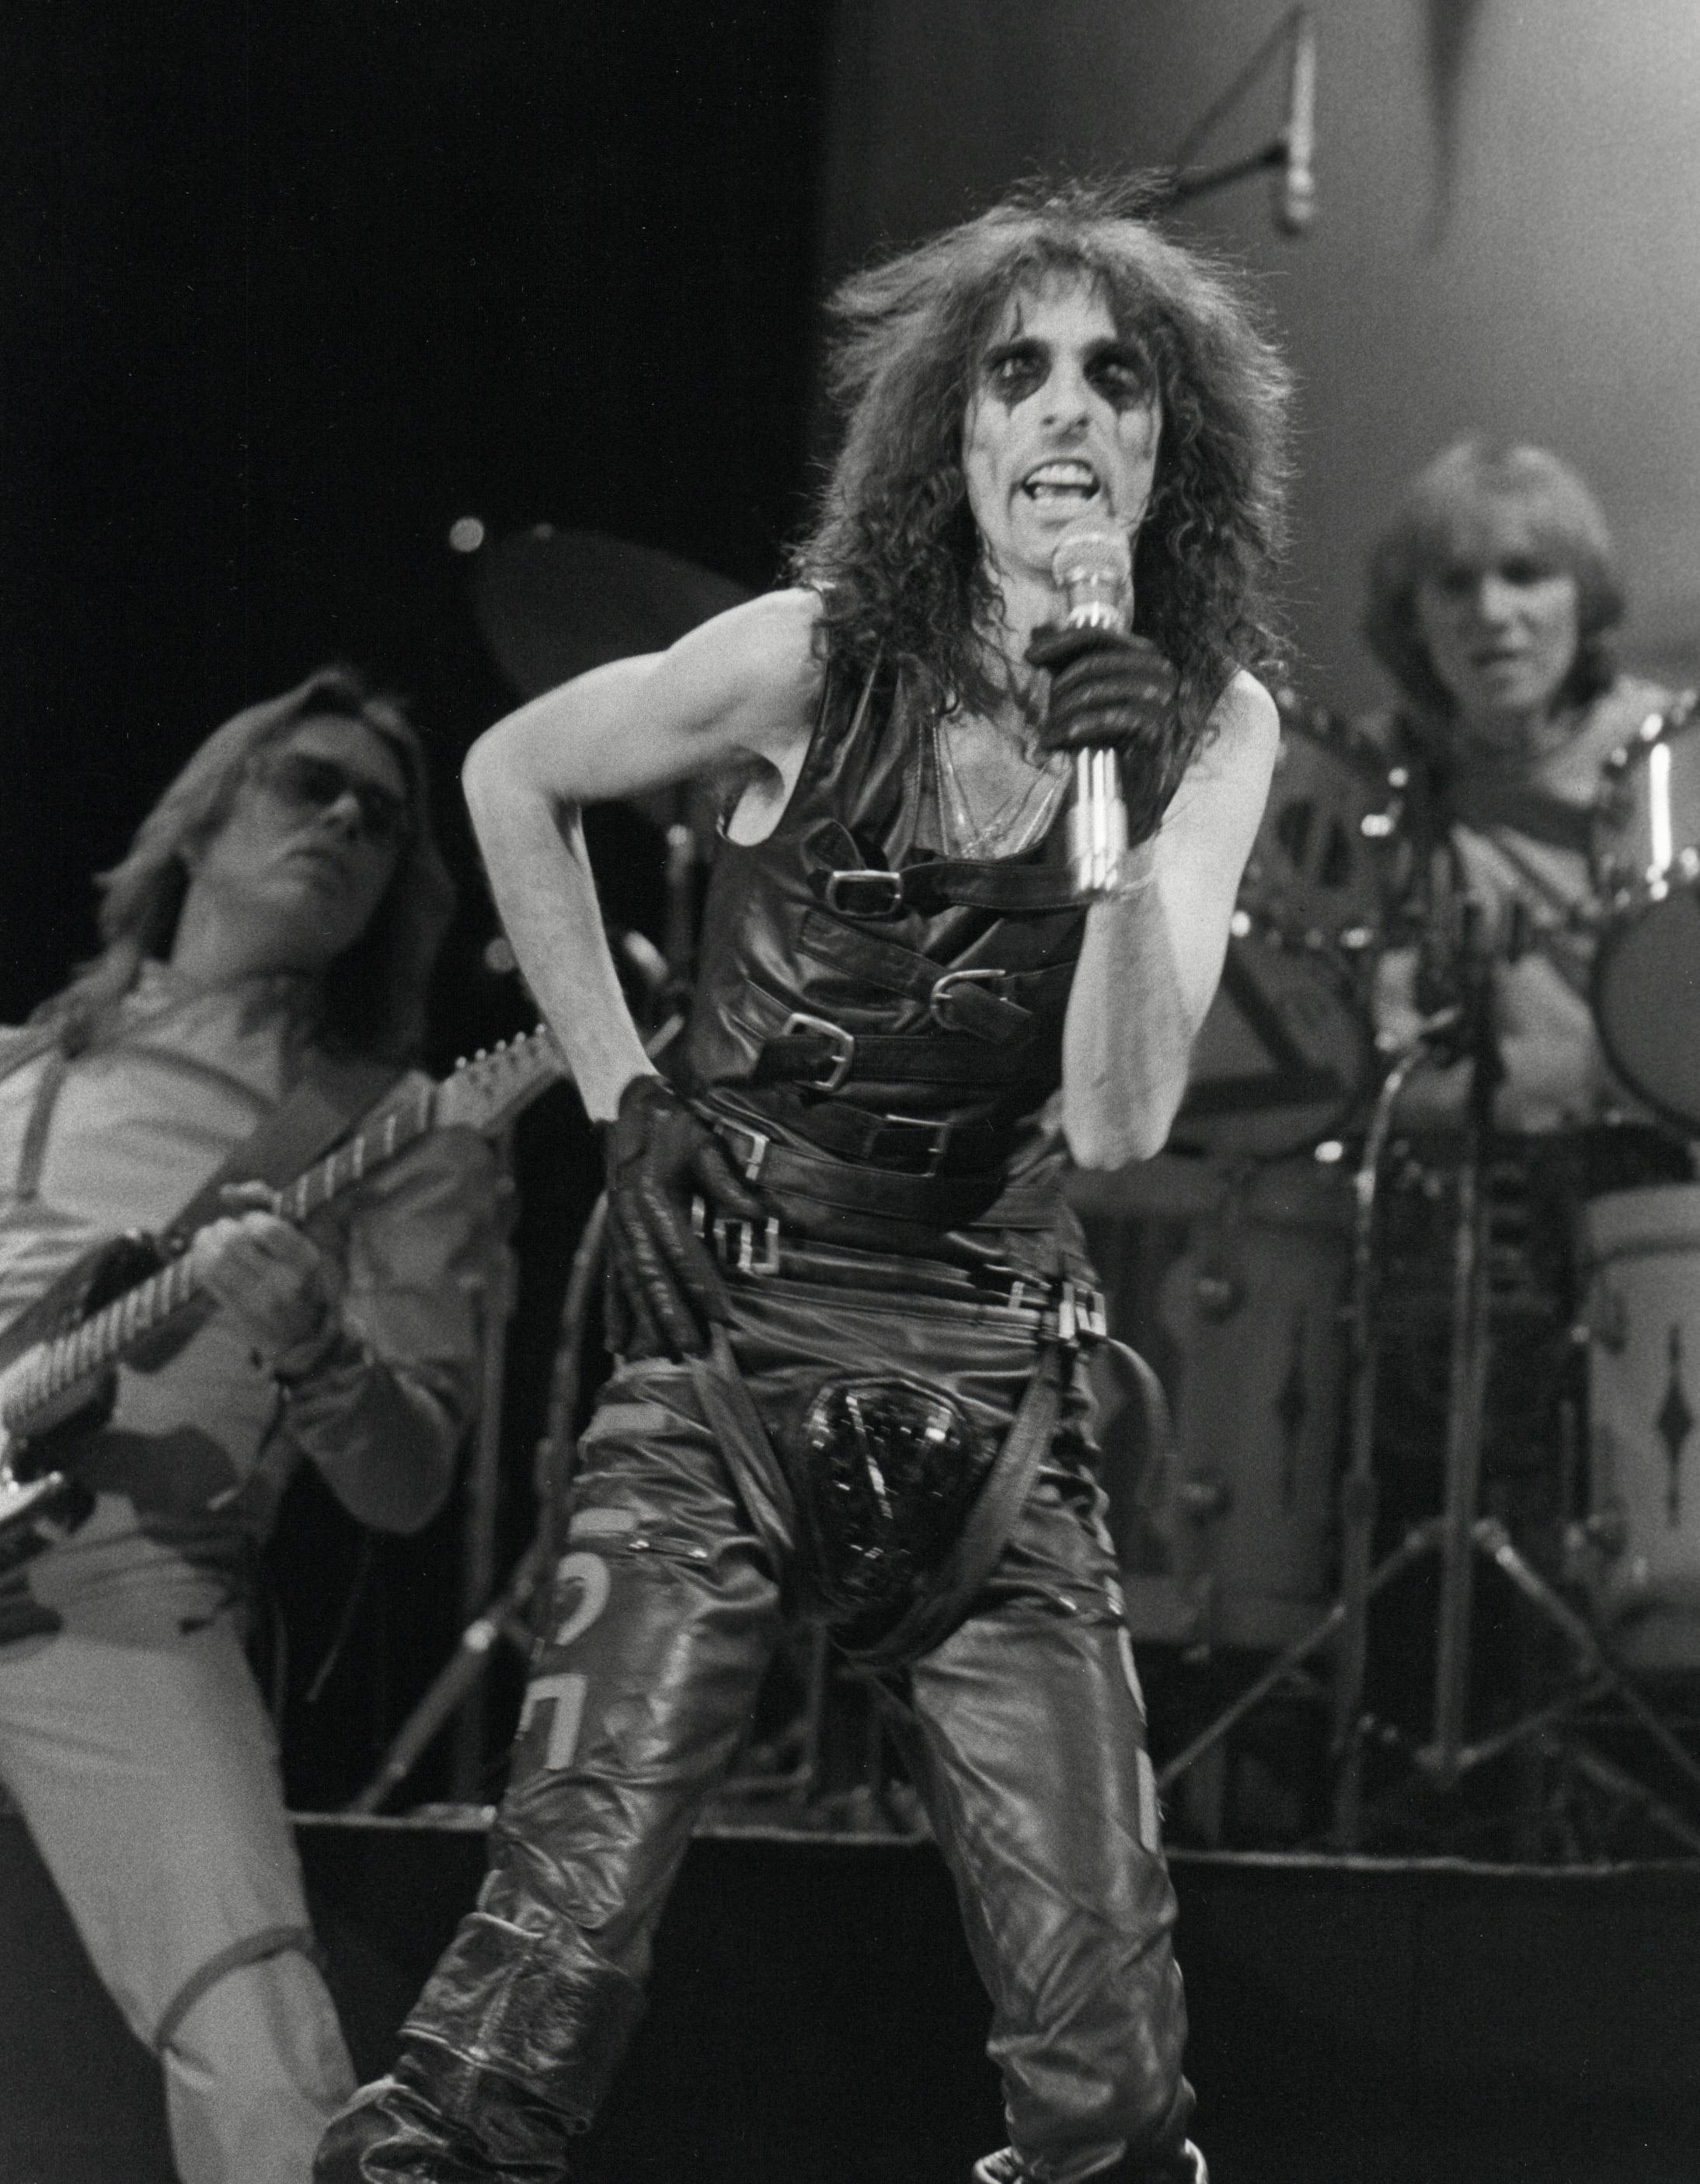 Chris Walter Black and White Photograph - Alice Cooper Performing with Wide Eyes Vintage Original Photograph